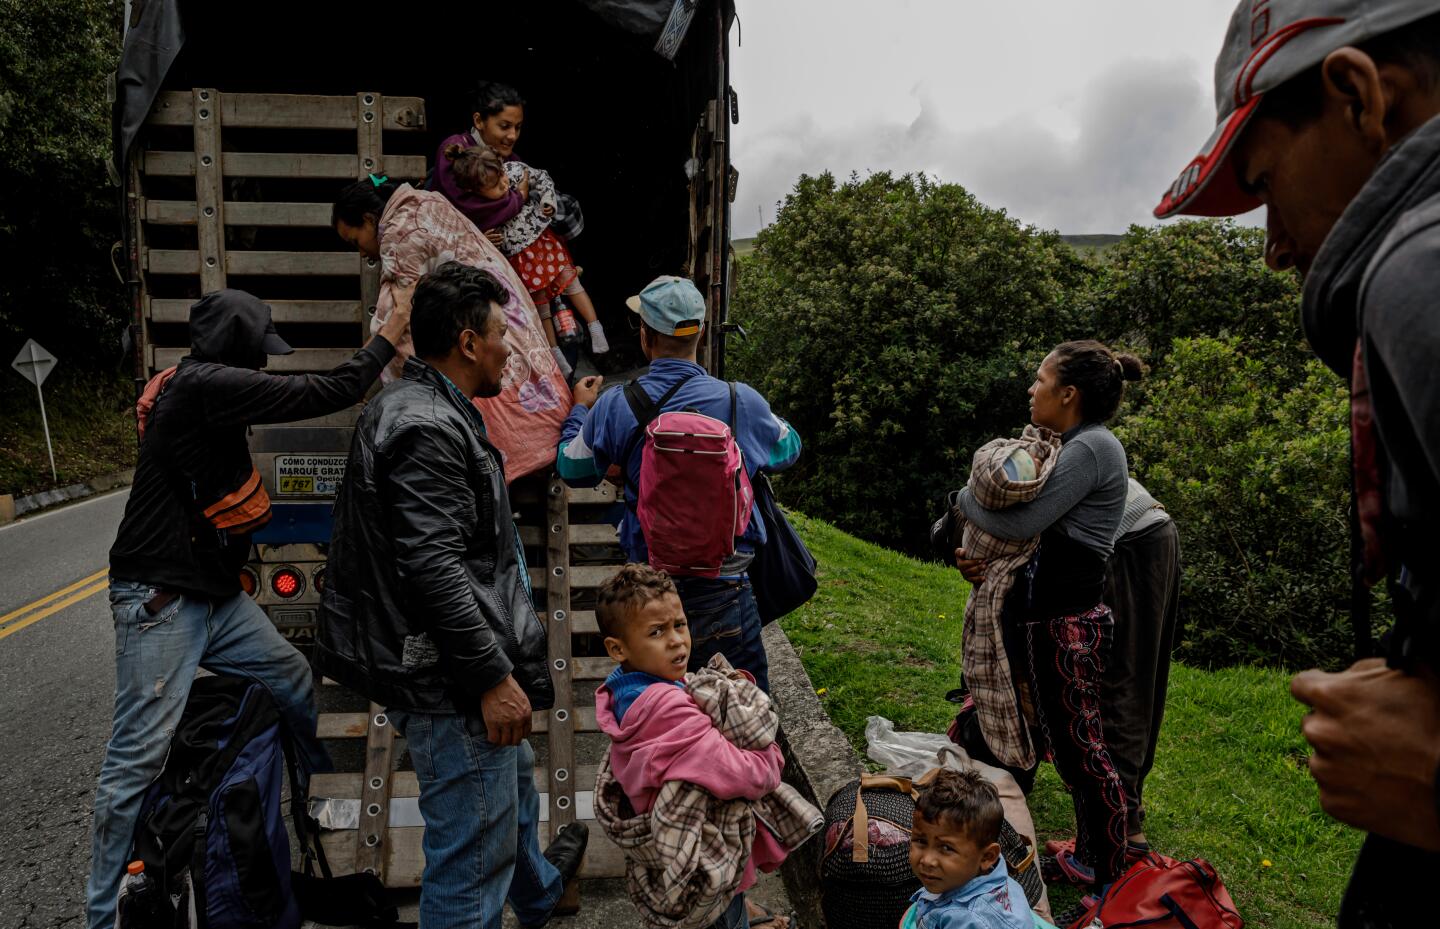 Venezuelan migrants disembark from a truck after getting a ride through the Colombian countryside.